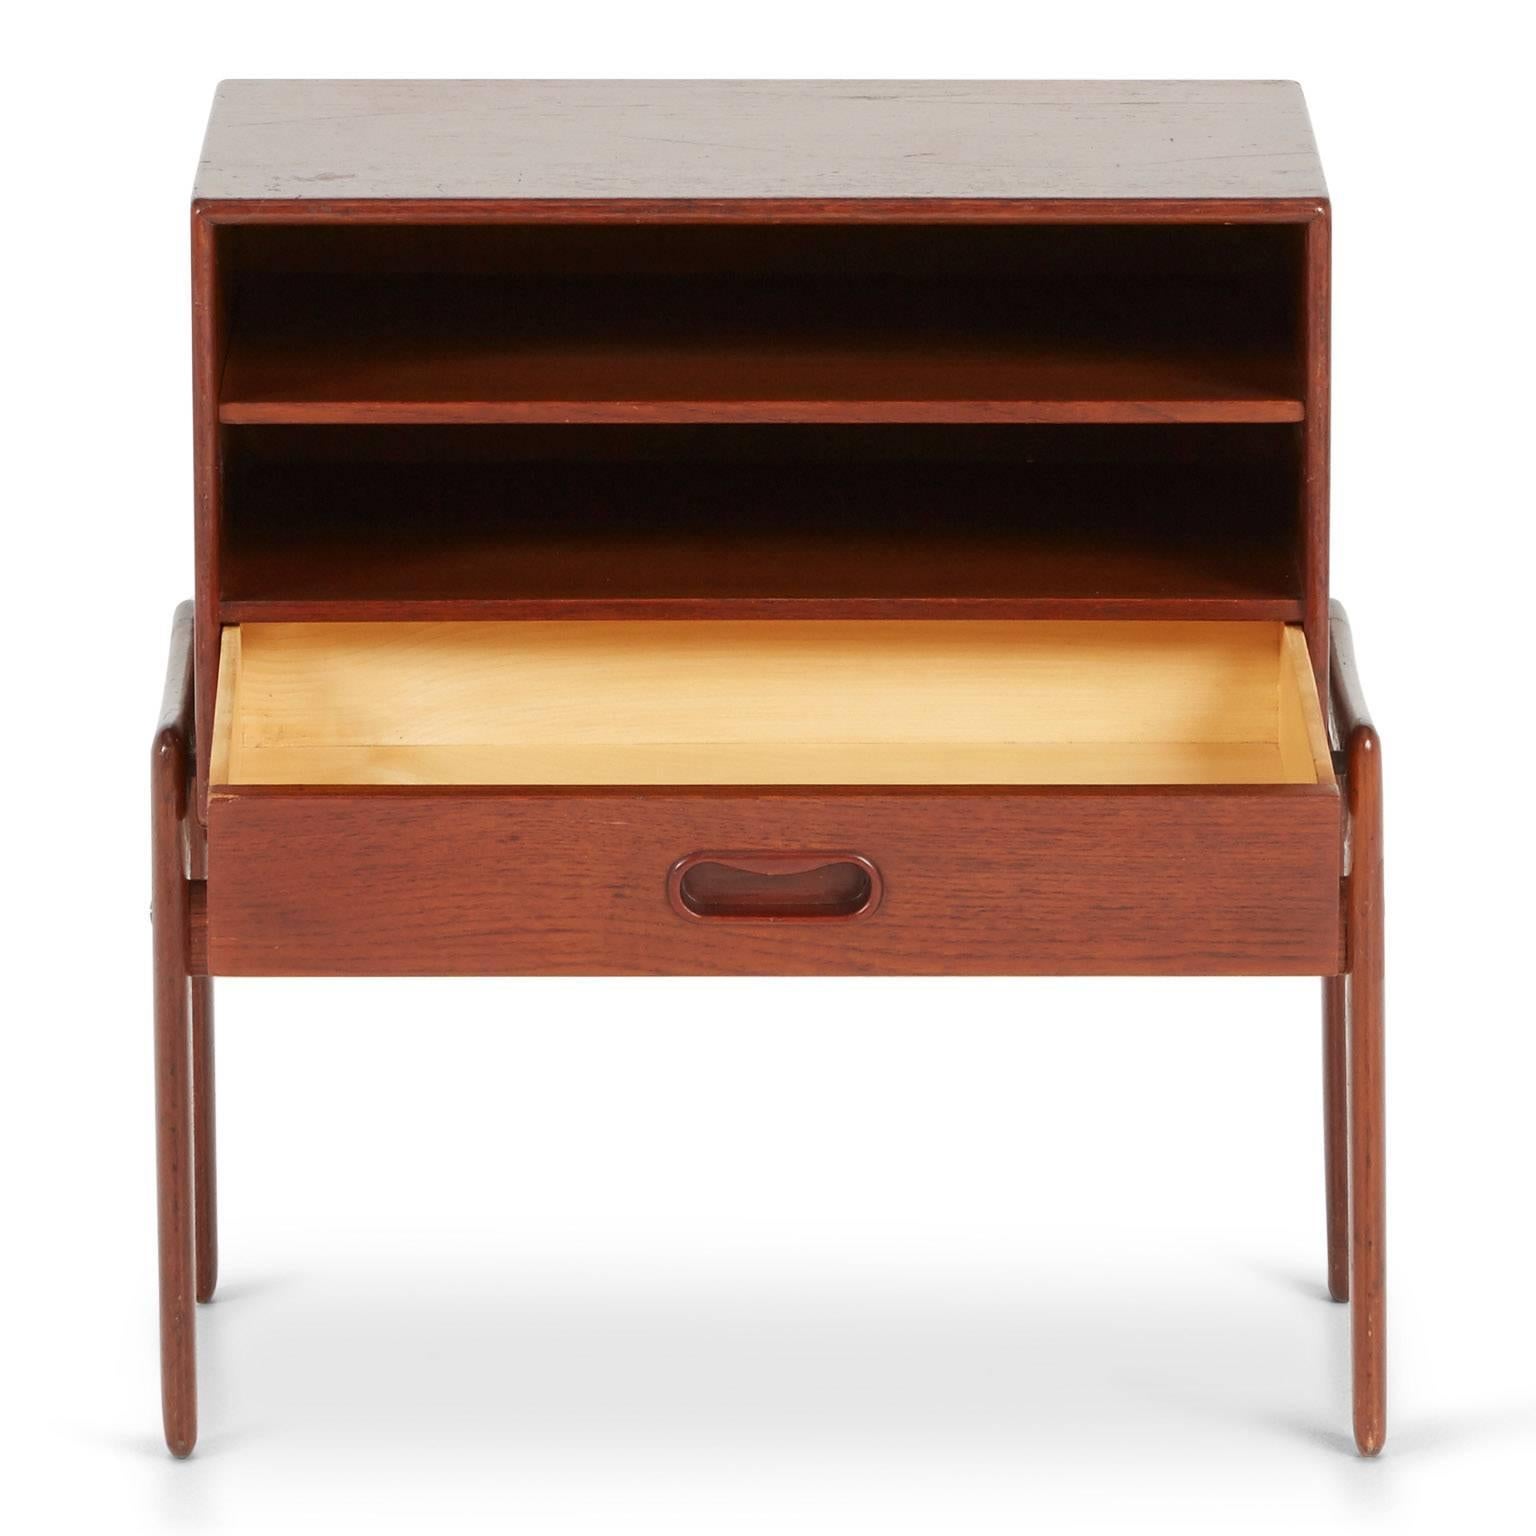 Sleek and compact, this Arne Vodder Danish Modern nightstand for Vamo Sonderborg is a testament of the application of traditional Danish craftsmanship expressed in Mid-Century design. Comprised of rich toned teak this piece offers an open shelf and